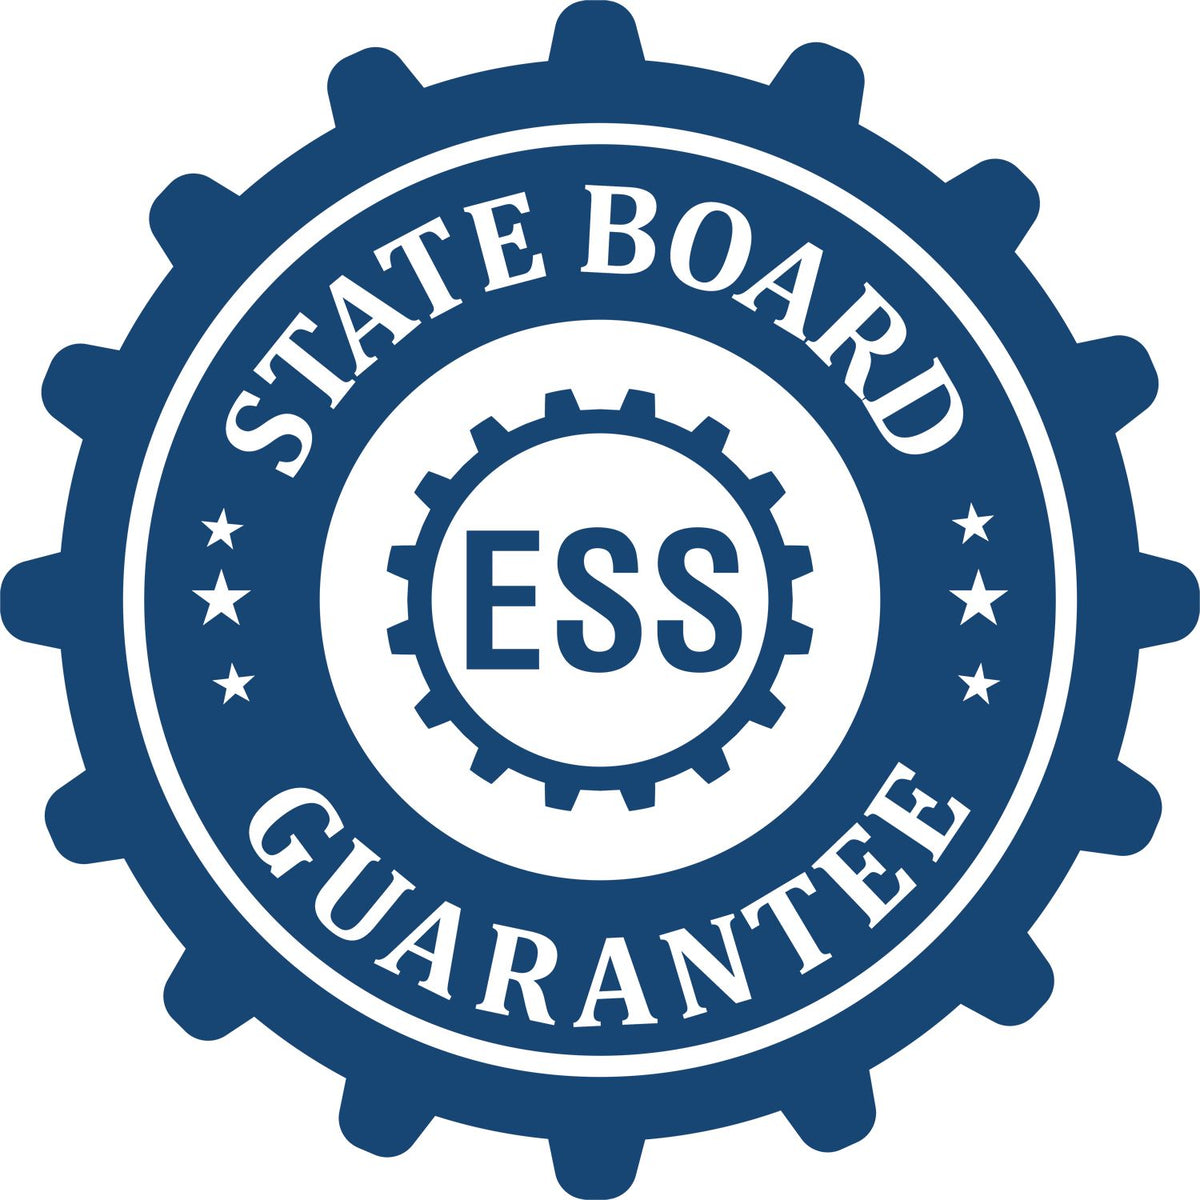 An emblem in a gear shape illustrating a state board guarantee for the Hybrid New Hampshire Engineer Seal